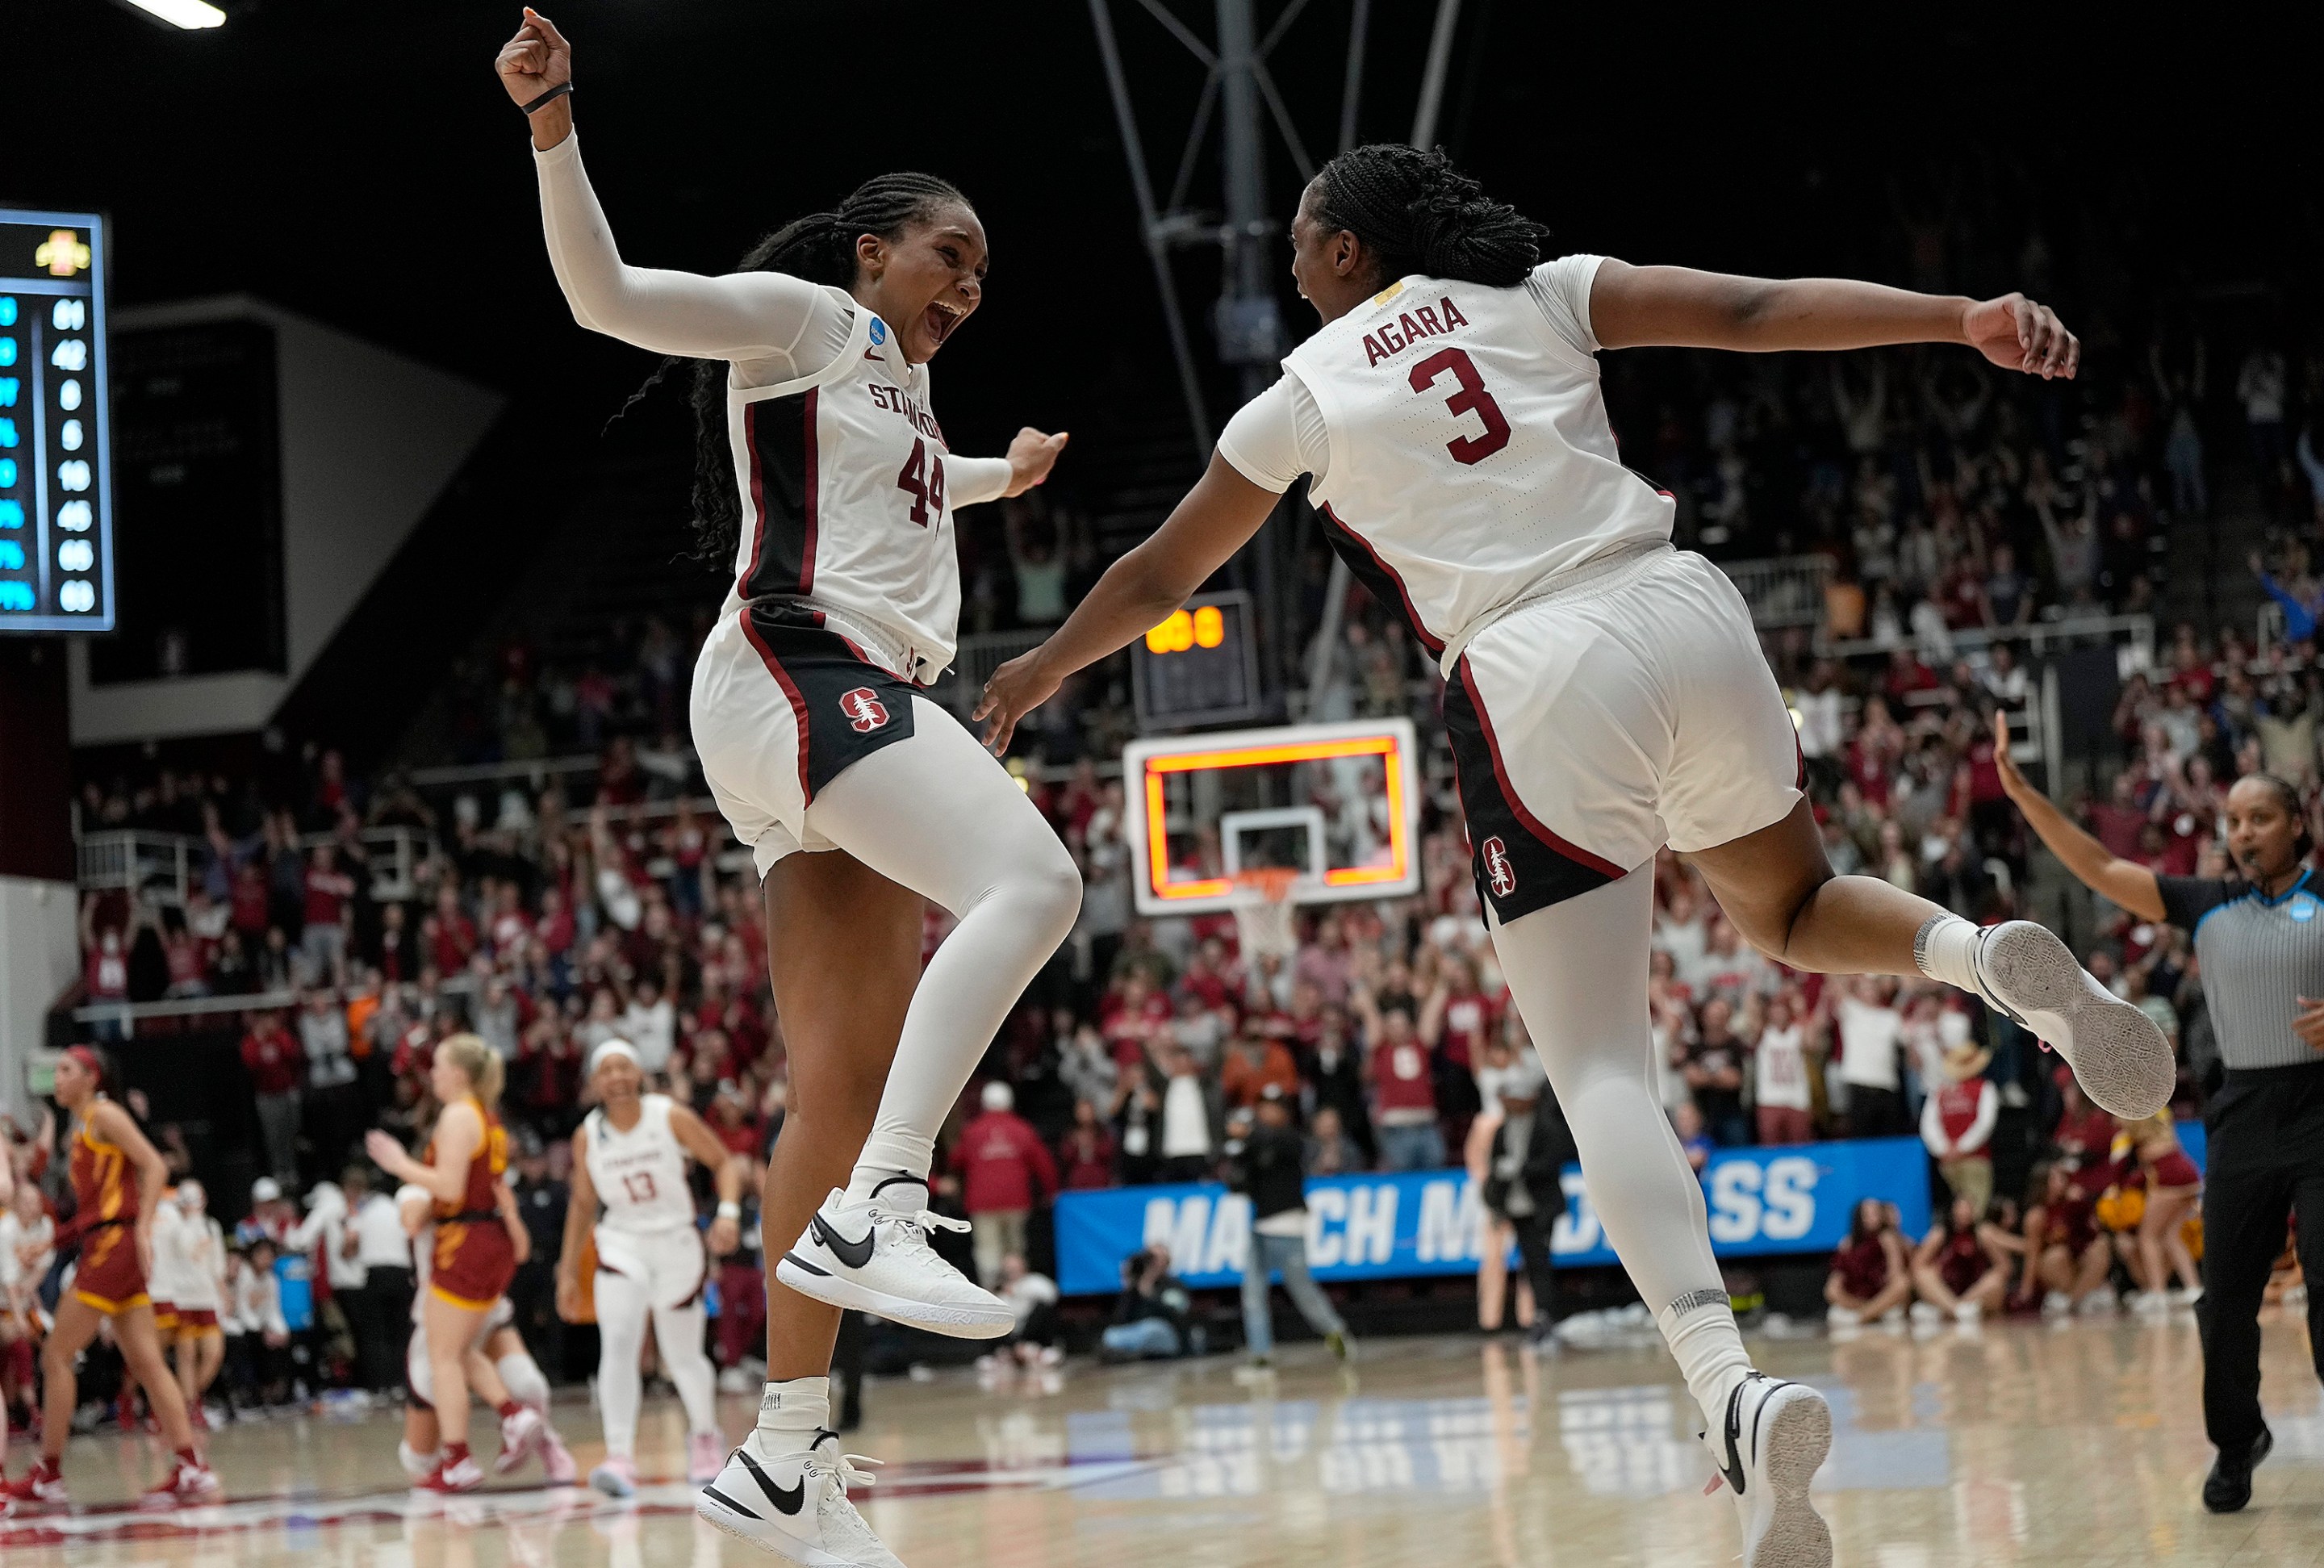 PALO ALTO, CALIFORNIA - MARCH 24: Kiki Iriafen #44 and Nunu Agara #3 of the Stanford Cardinal celebrates after they defeated the Iowa State Cyclones 87-81 in overtime in the second round of the NCAA Women's Basketball Tournament at Stanford Maples Pavilion on March 24, 2024 in Palo Alto, California. (Photo by Thearon W. Henderson/Getty Images)